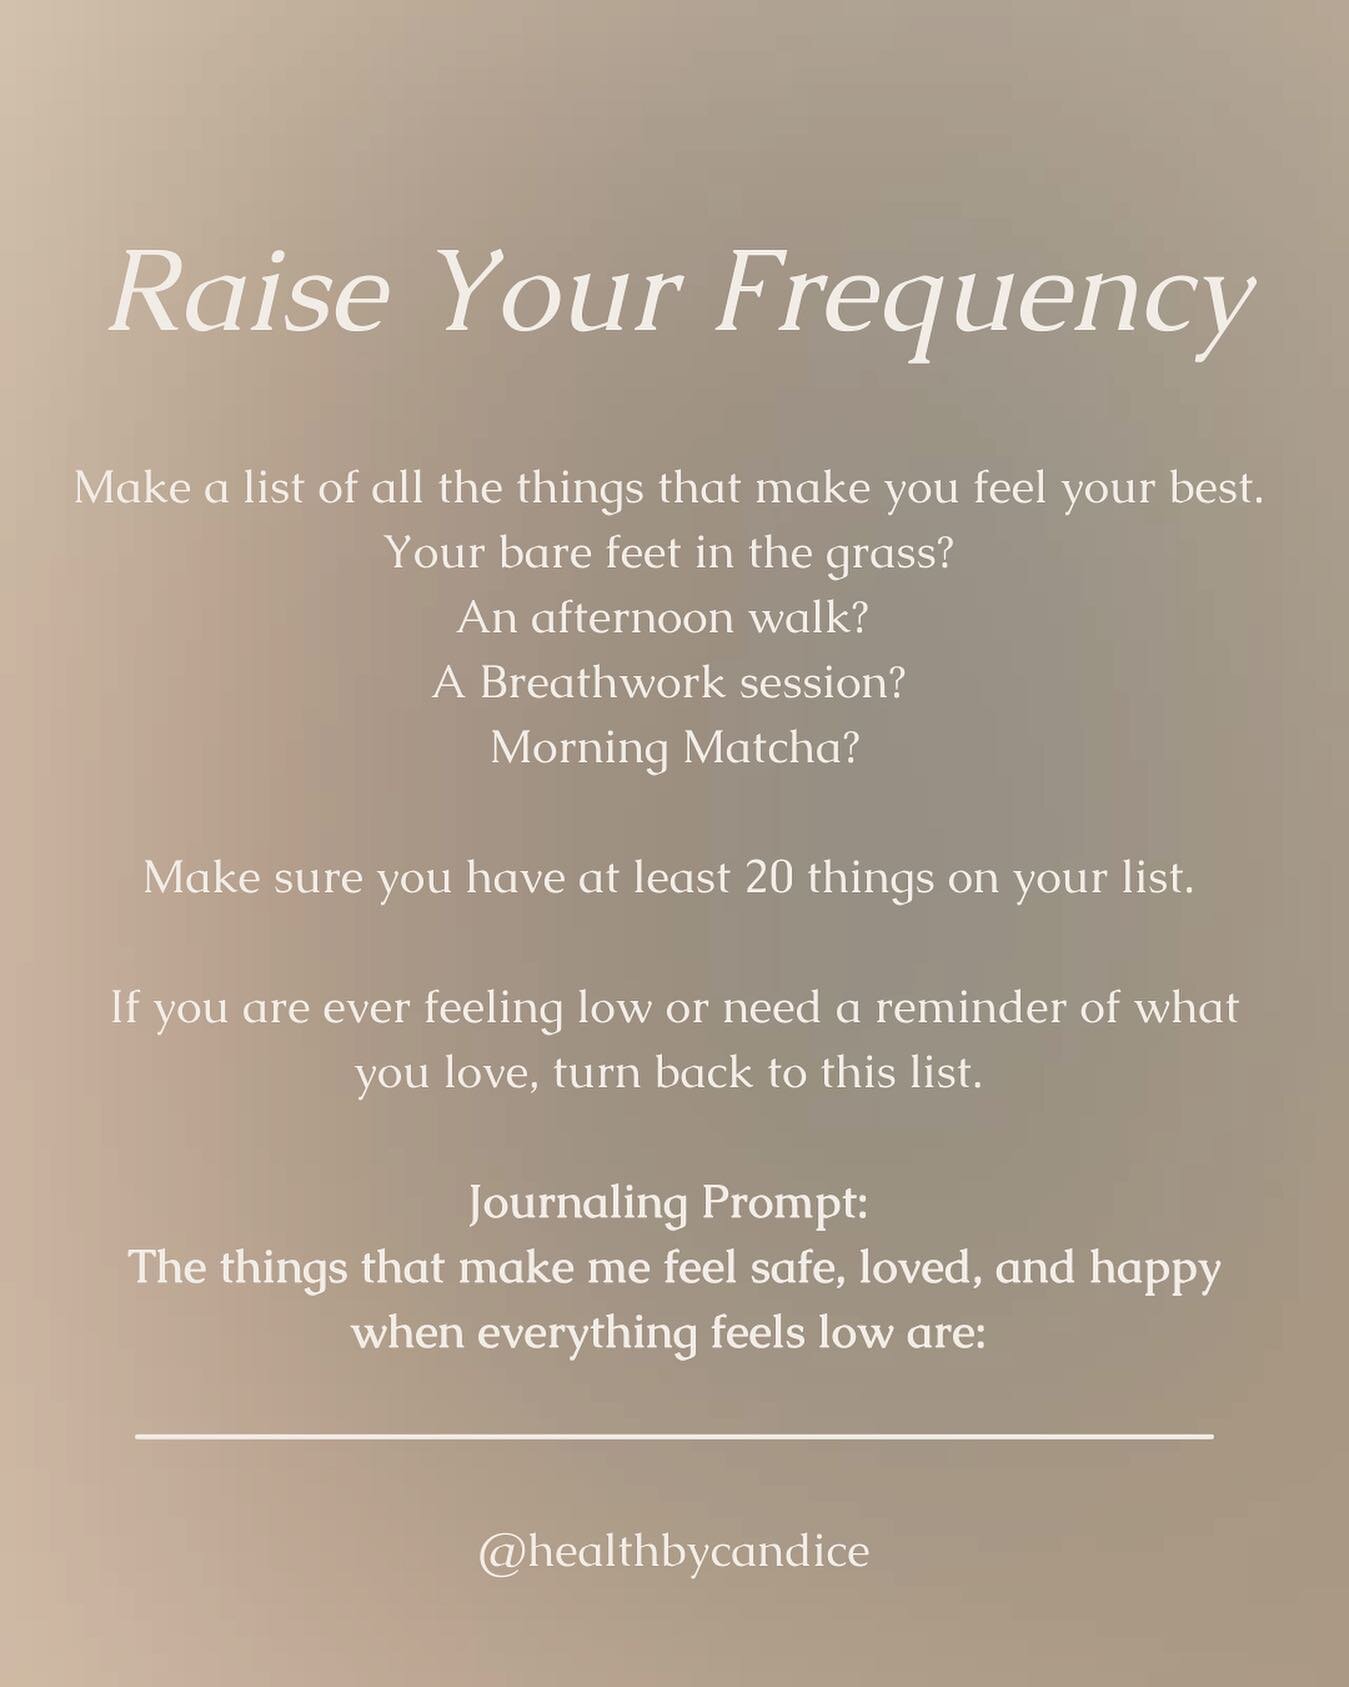 How to raise your frequency&hellip;&hellip;.✨

[save this post for the next time you need an energy booster]

xx

.
.
.
#soulalignment #quantumentanglement #quantumhealing #quantumenergy #quantumleap #consciousnessshift #expandingconsciousness #colle